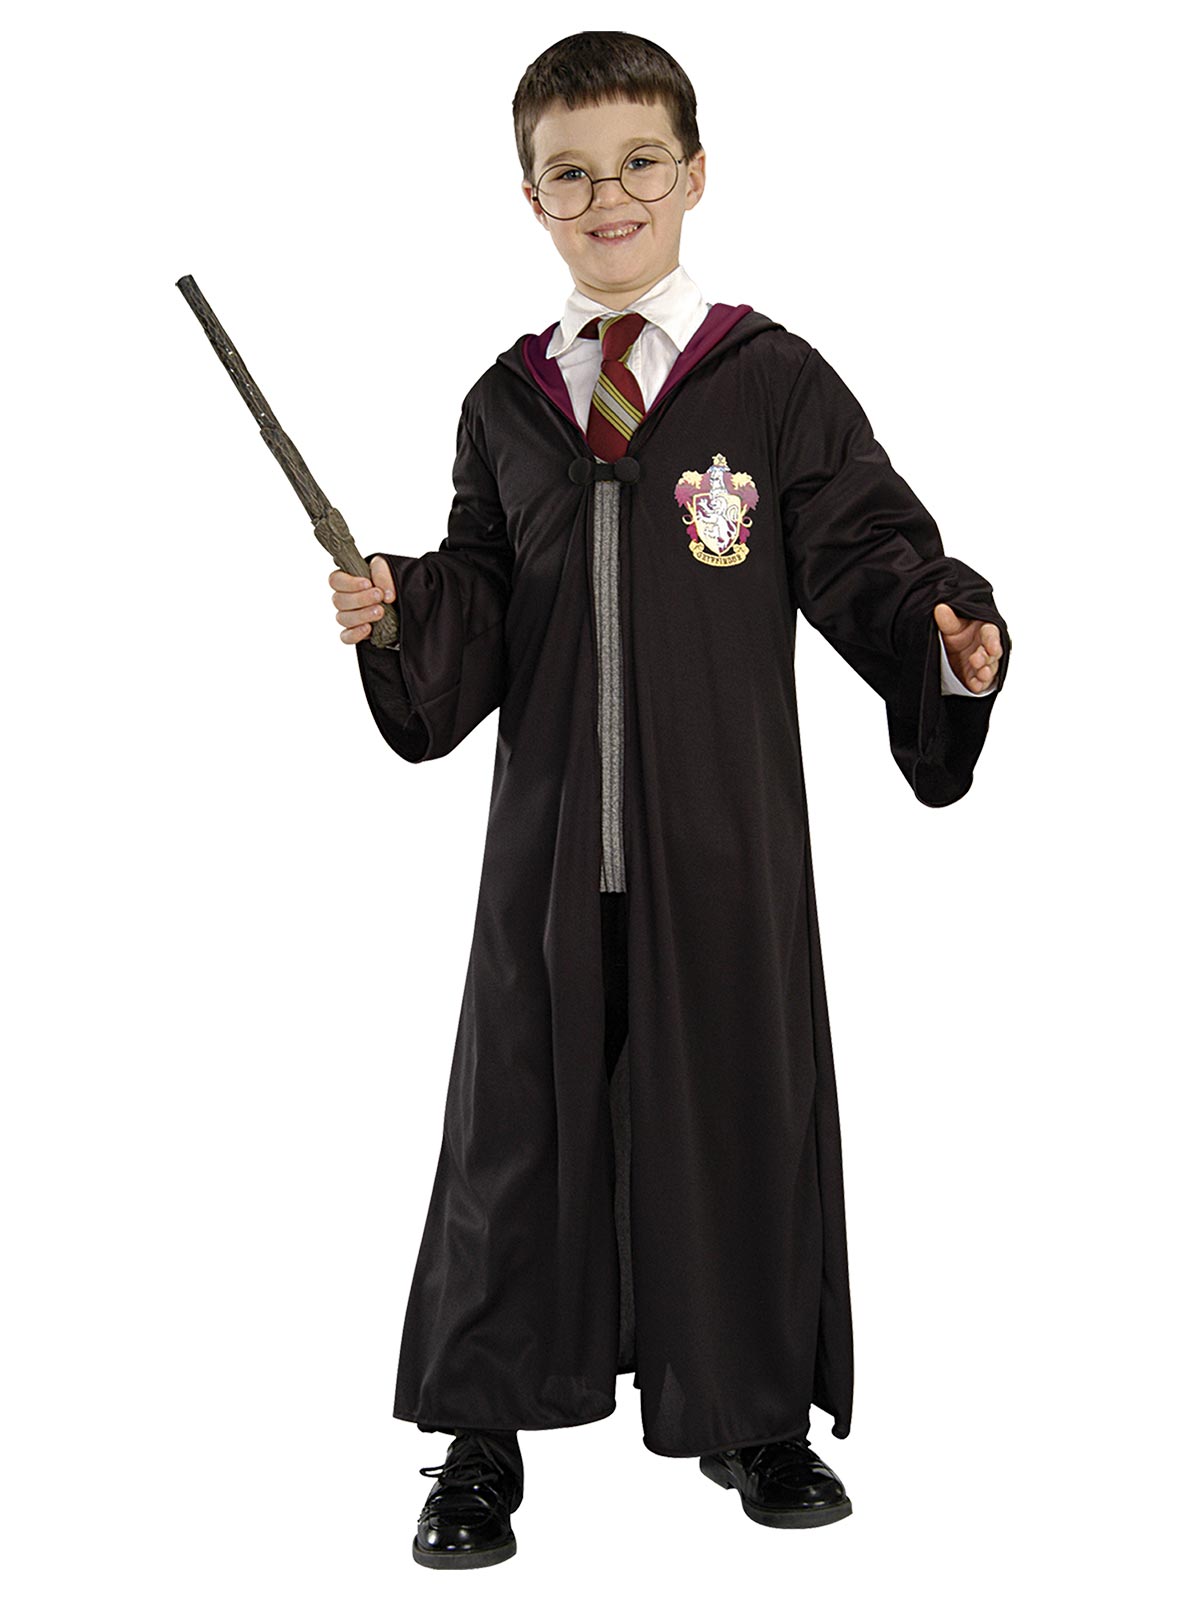 Harry Potter Wand and Glasses Costume Kit Child